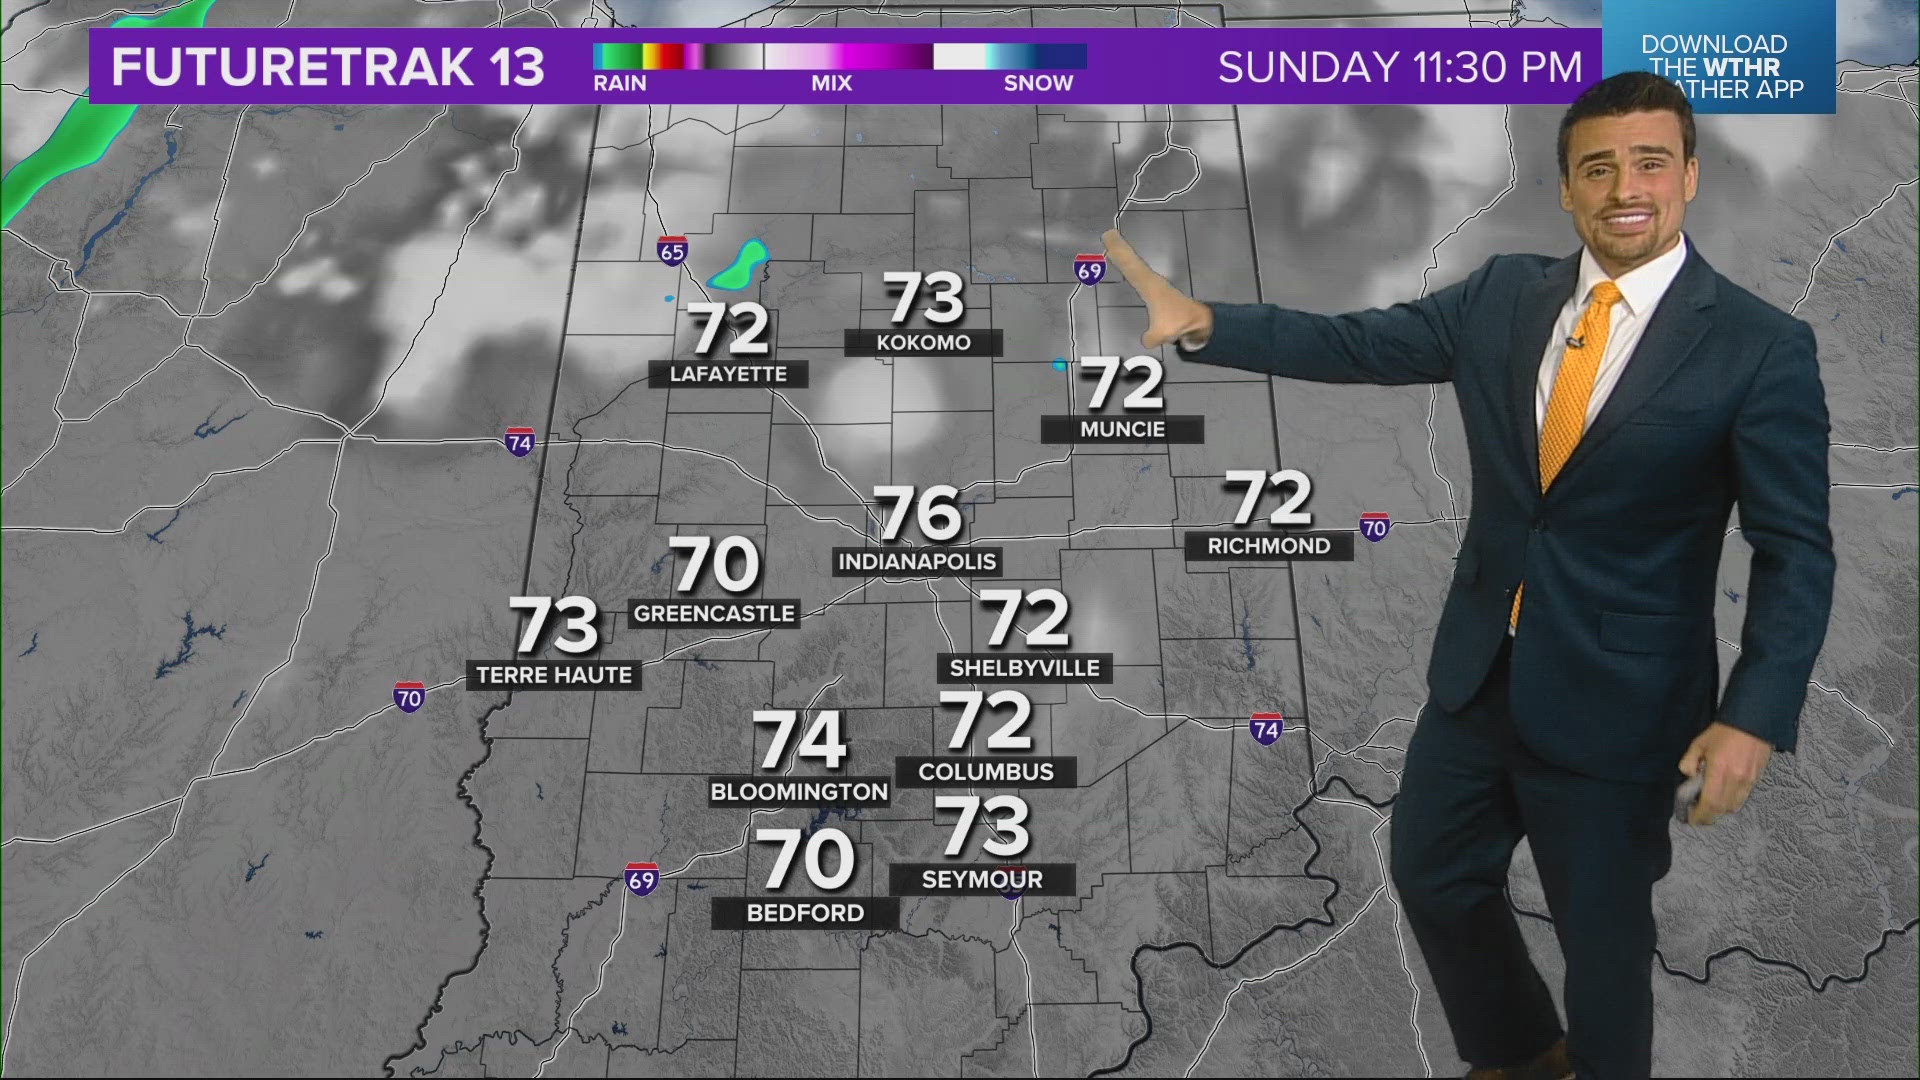 13News meteorologist Matt Standridge previews the hot weather ahead in central Indiana.